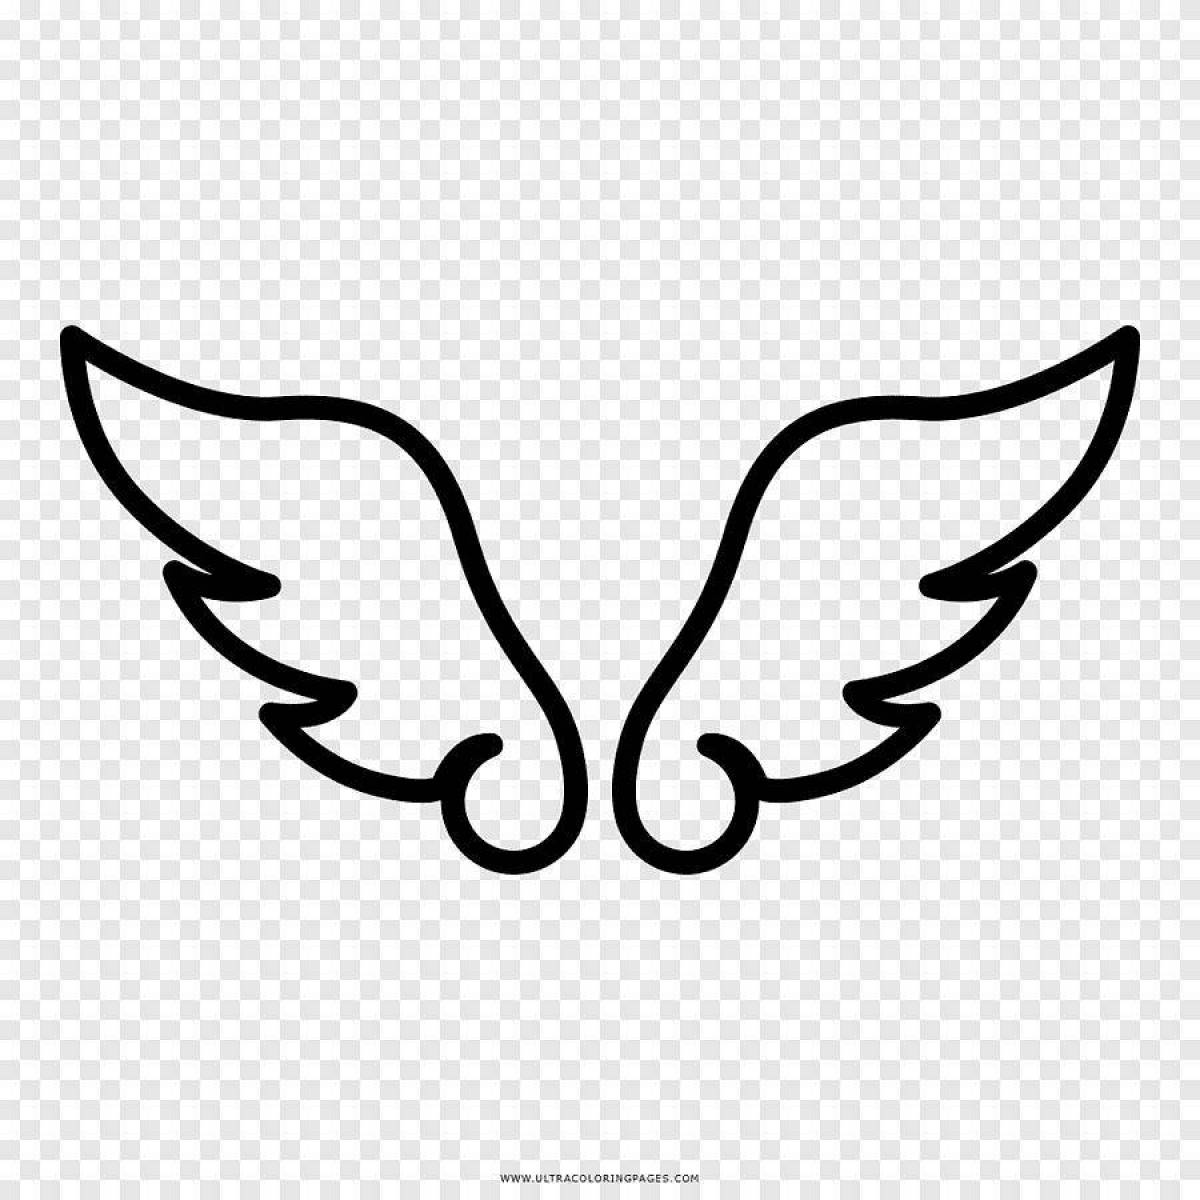 Deluxe angel wings coloring page